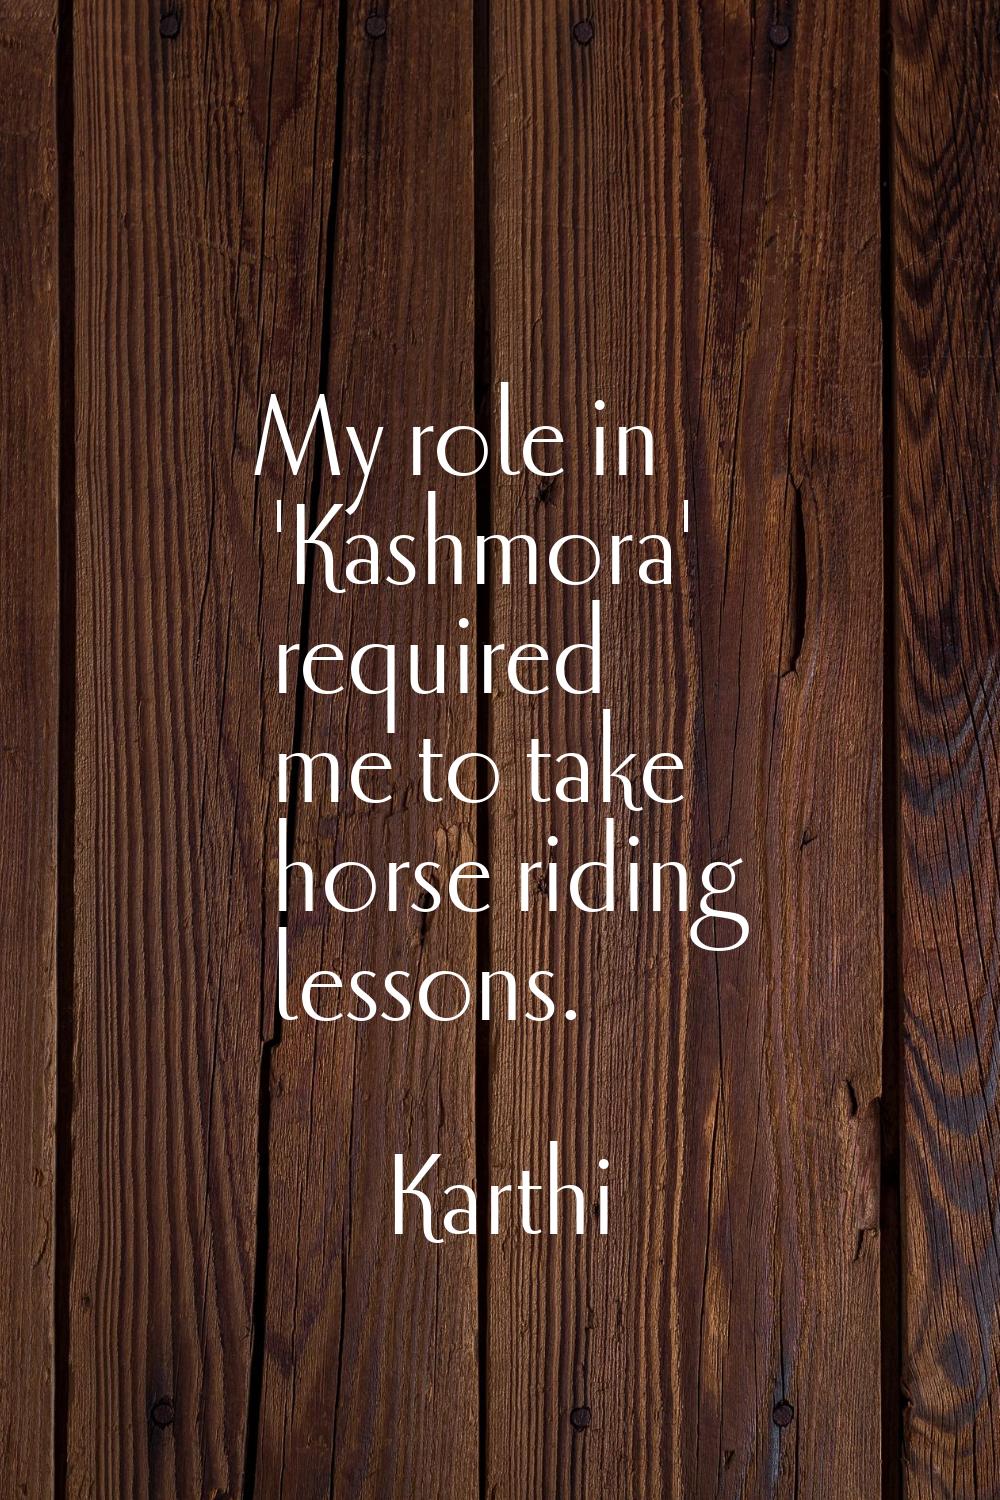 My role in 'Kashmora' required me to take horse riding lessons.